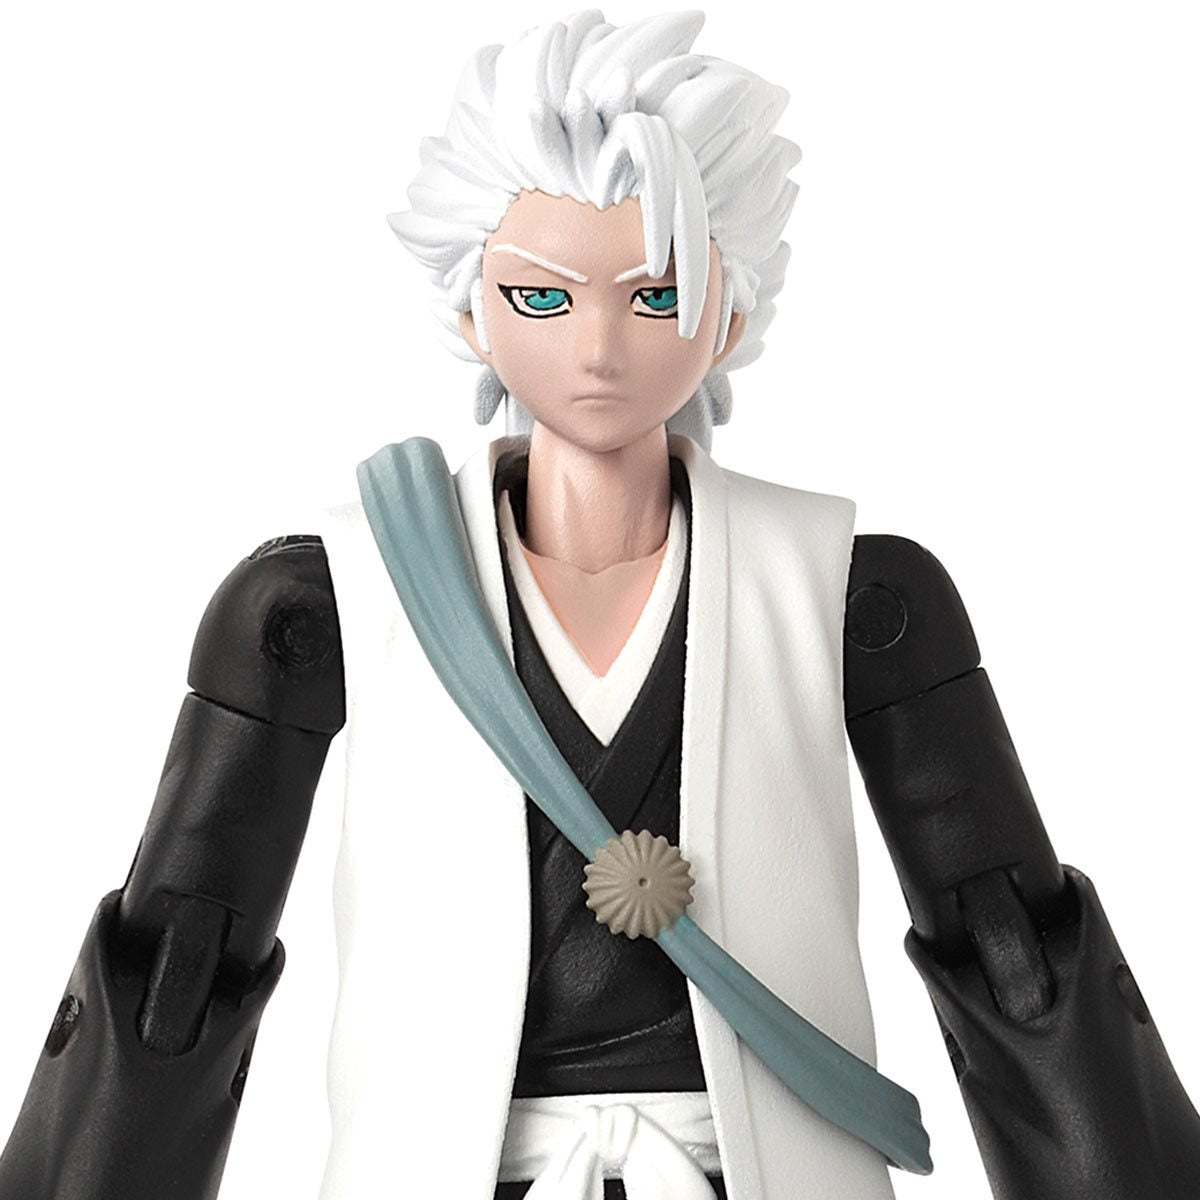 Buy Bandai Anime Heroes Bleach Ichigo Kurosaki Action Figure Online |  Kogan.com. MANUFACTURER’S DESCRIPTION Fans of one of the BIG 3 anime  titles can now bring their favourite Bleach characters home with